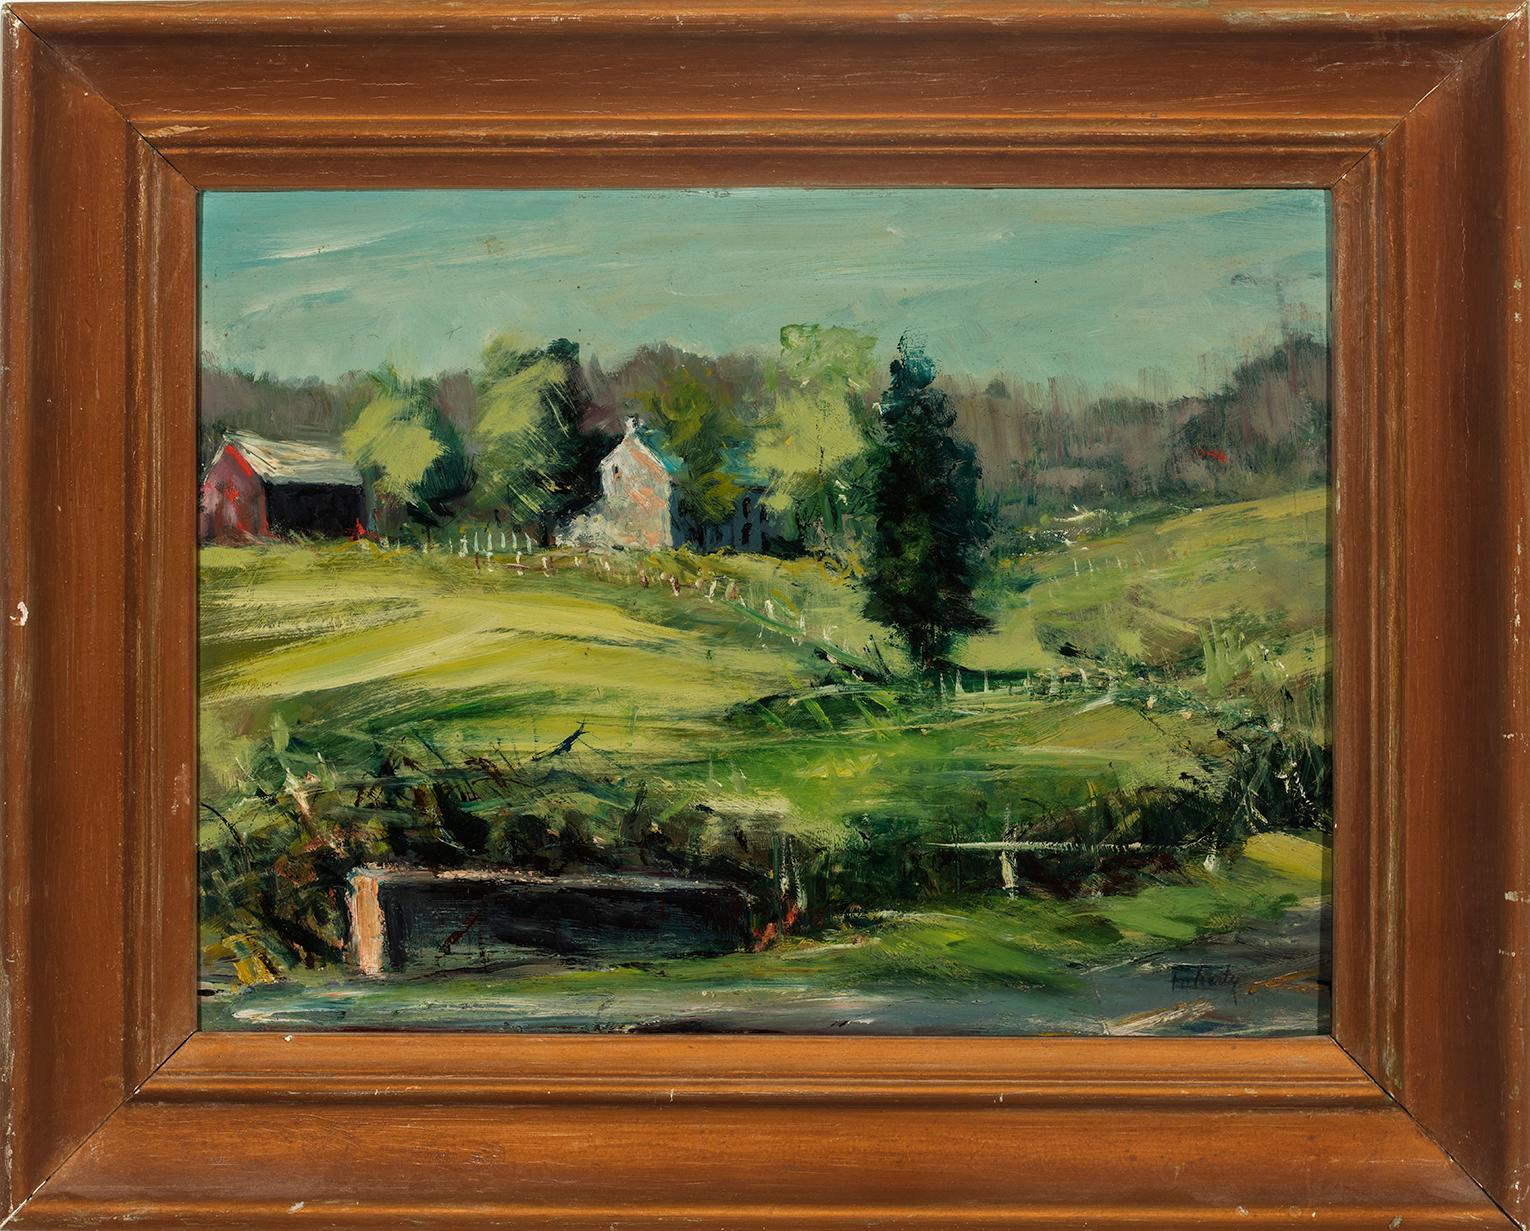 Landscape Painting Evelyn Faherty - "Solebury Hills"